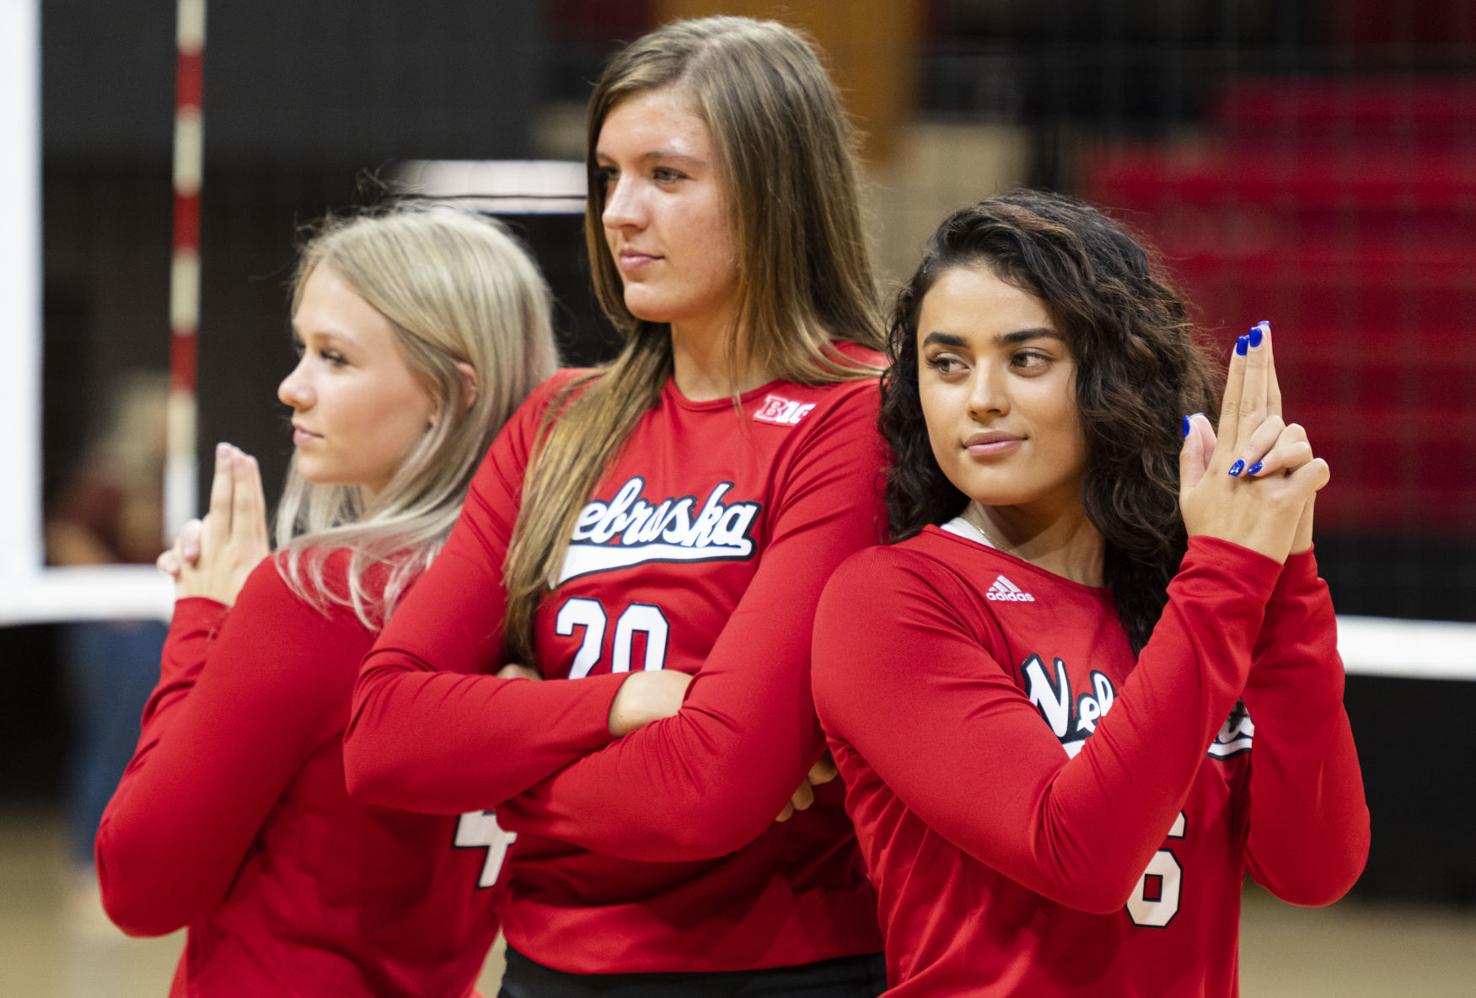 Nebraska volleyball will be on TV a lot this season. Here's the start